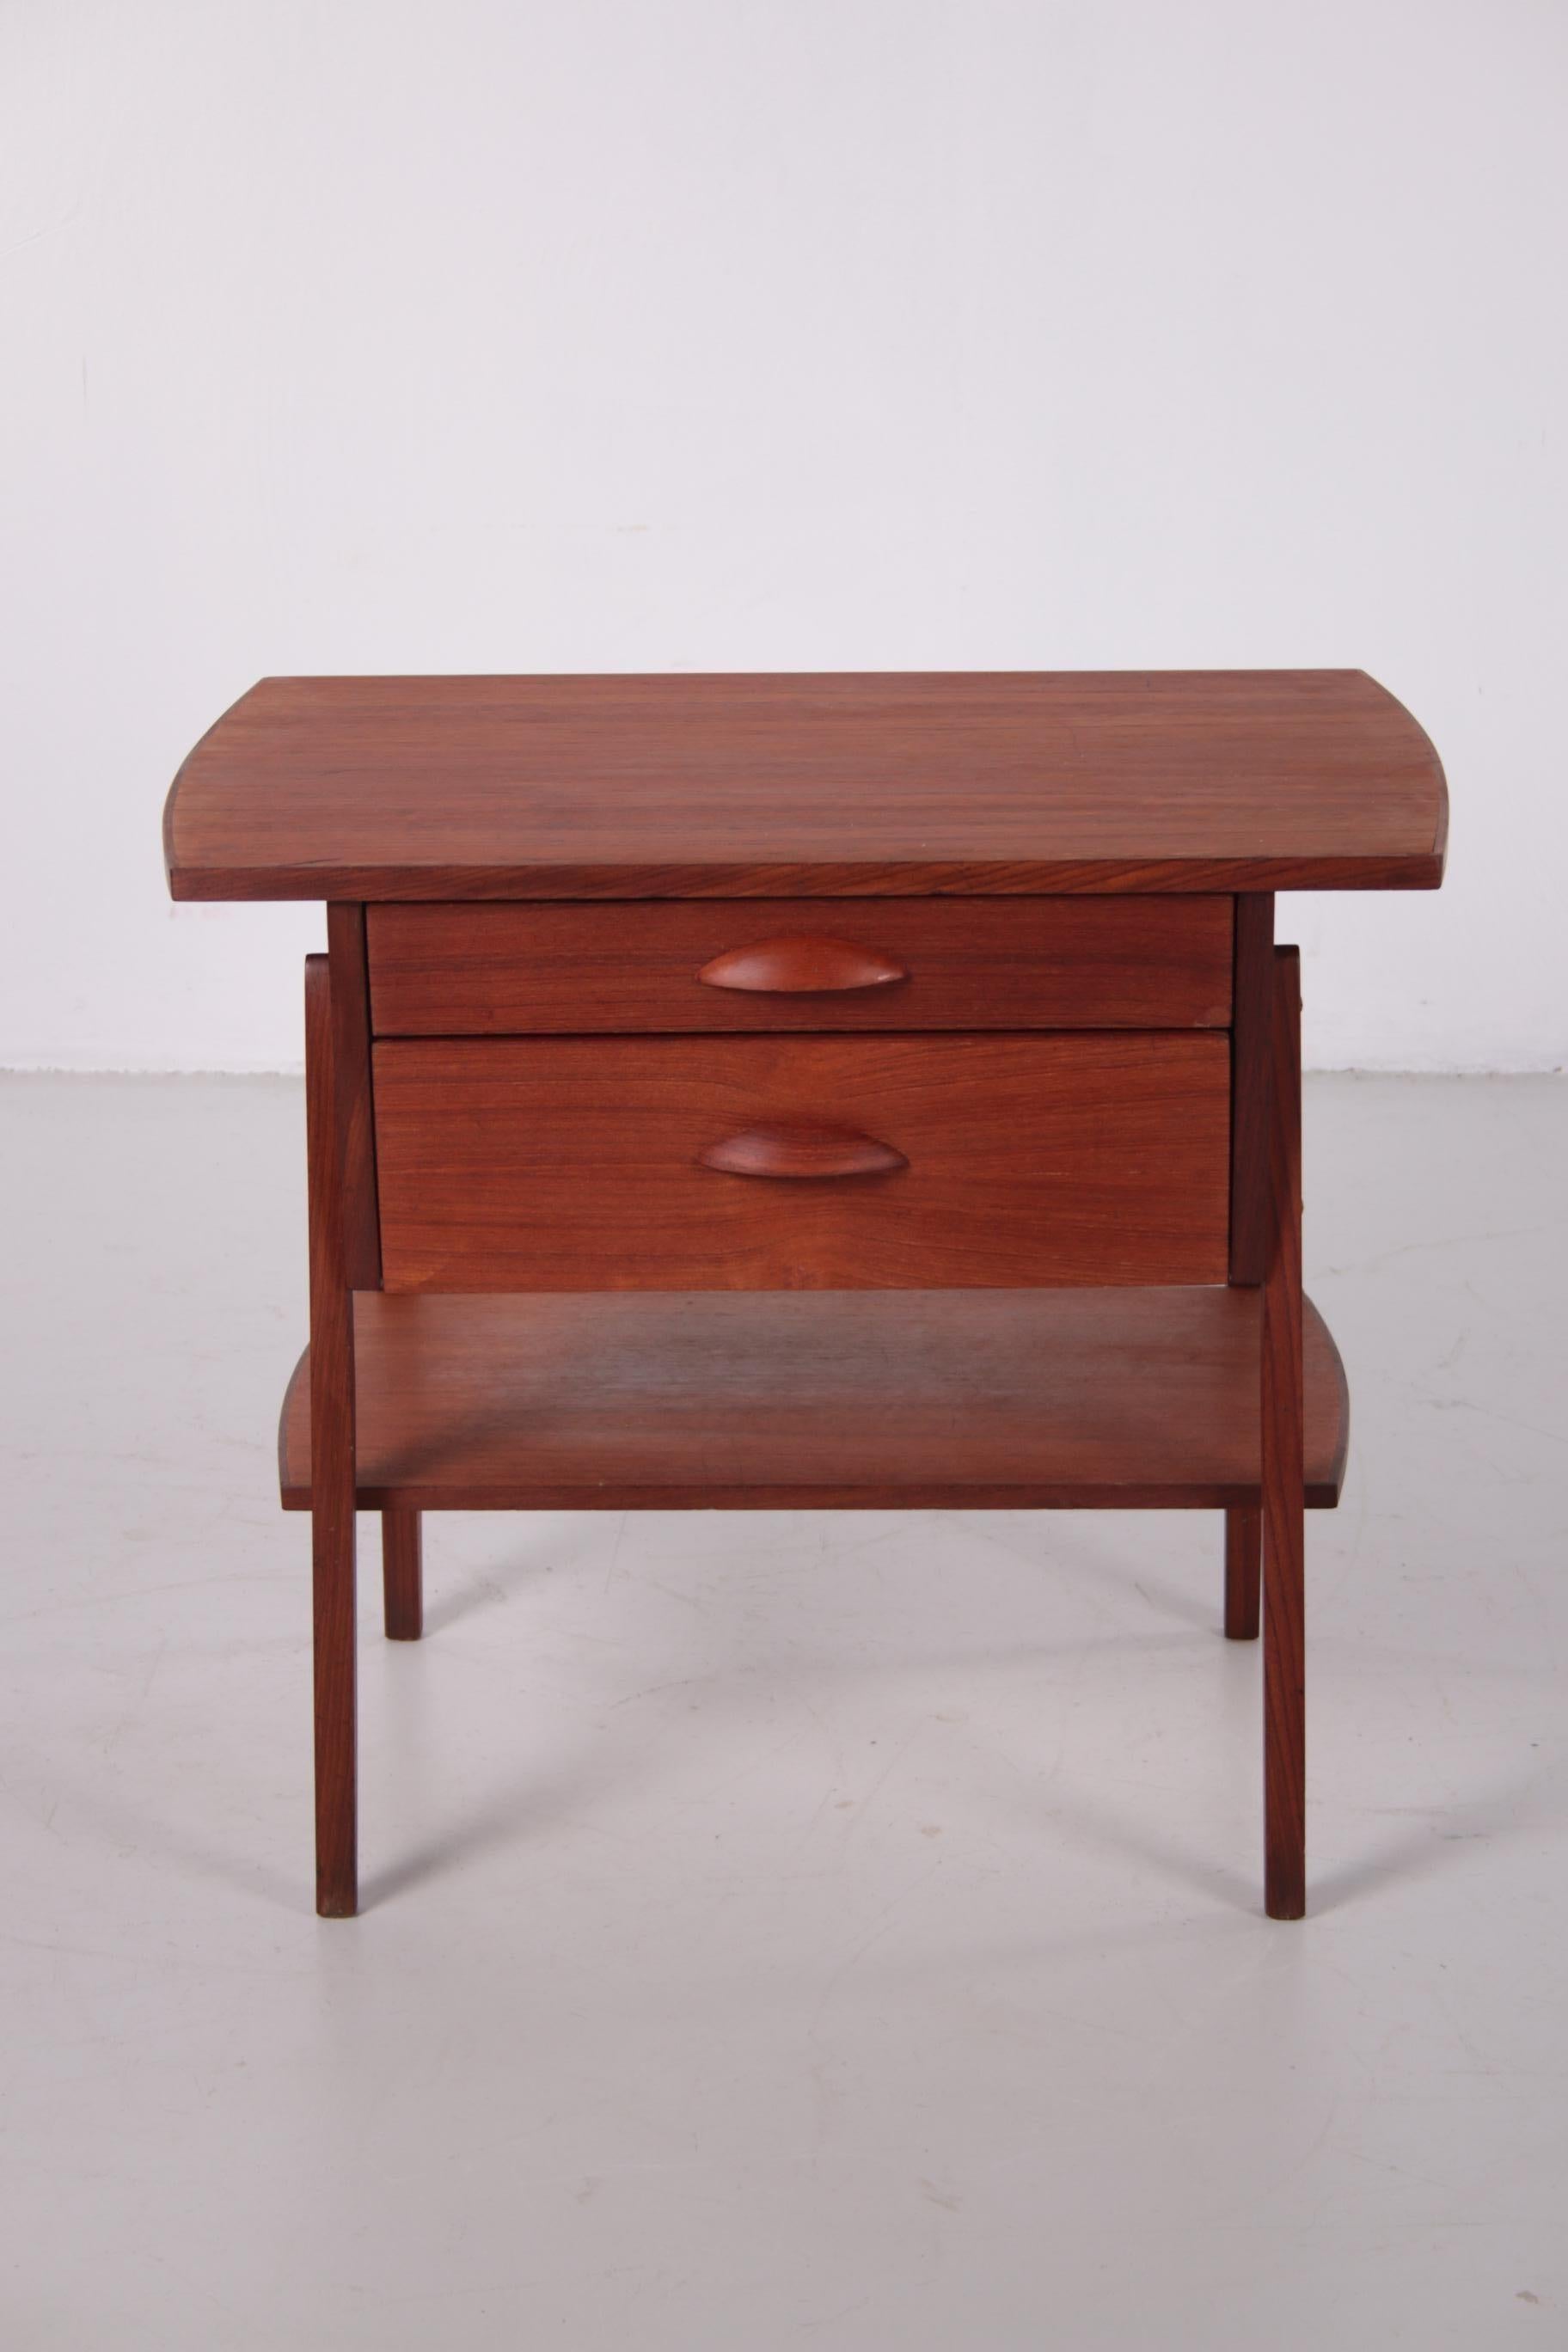 Teak vintage side table and chest of drawers from the sixties, Denmark. 
Beautiful model with round organically shaped handles and 2 large drawers. 
The top drawers there are compartments. 
The condition is perfect considering the age, it is